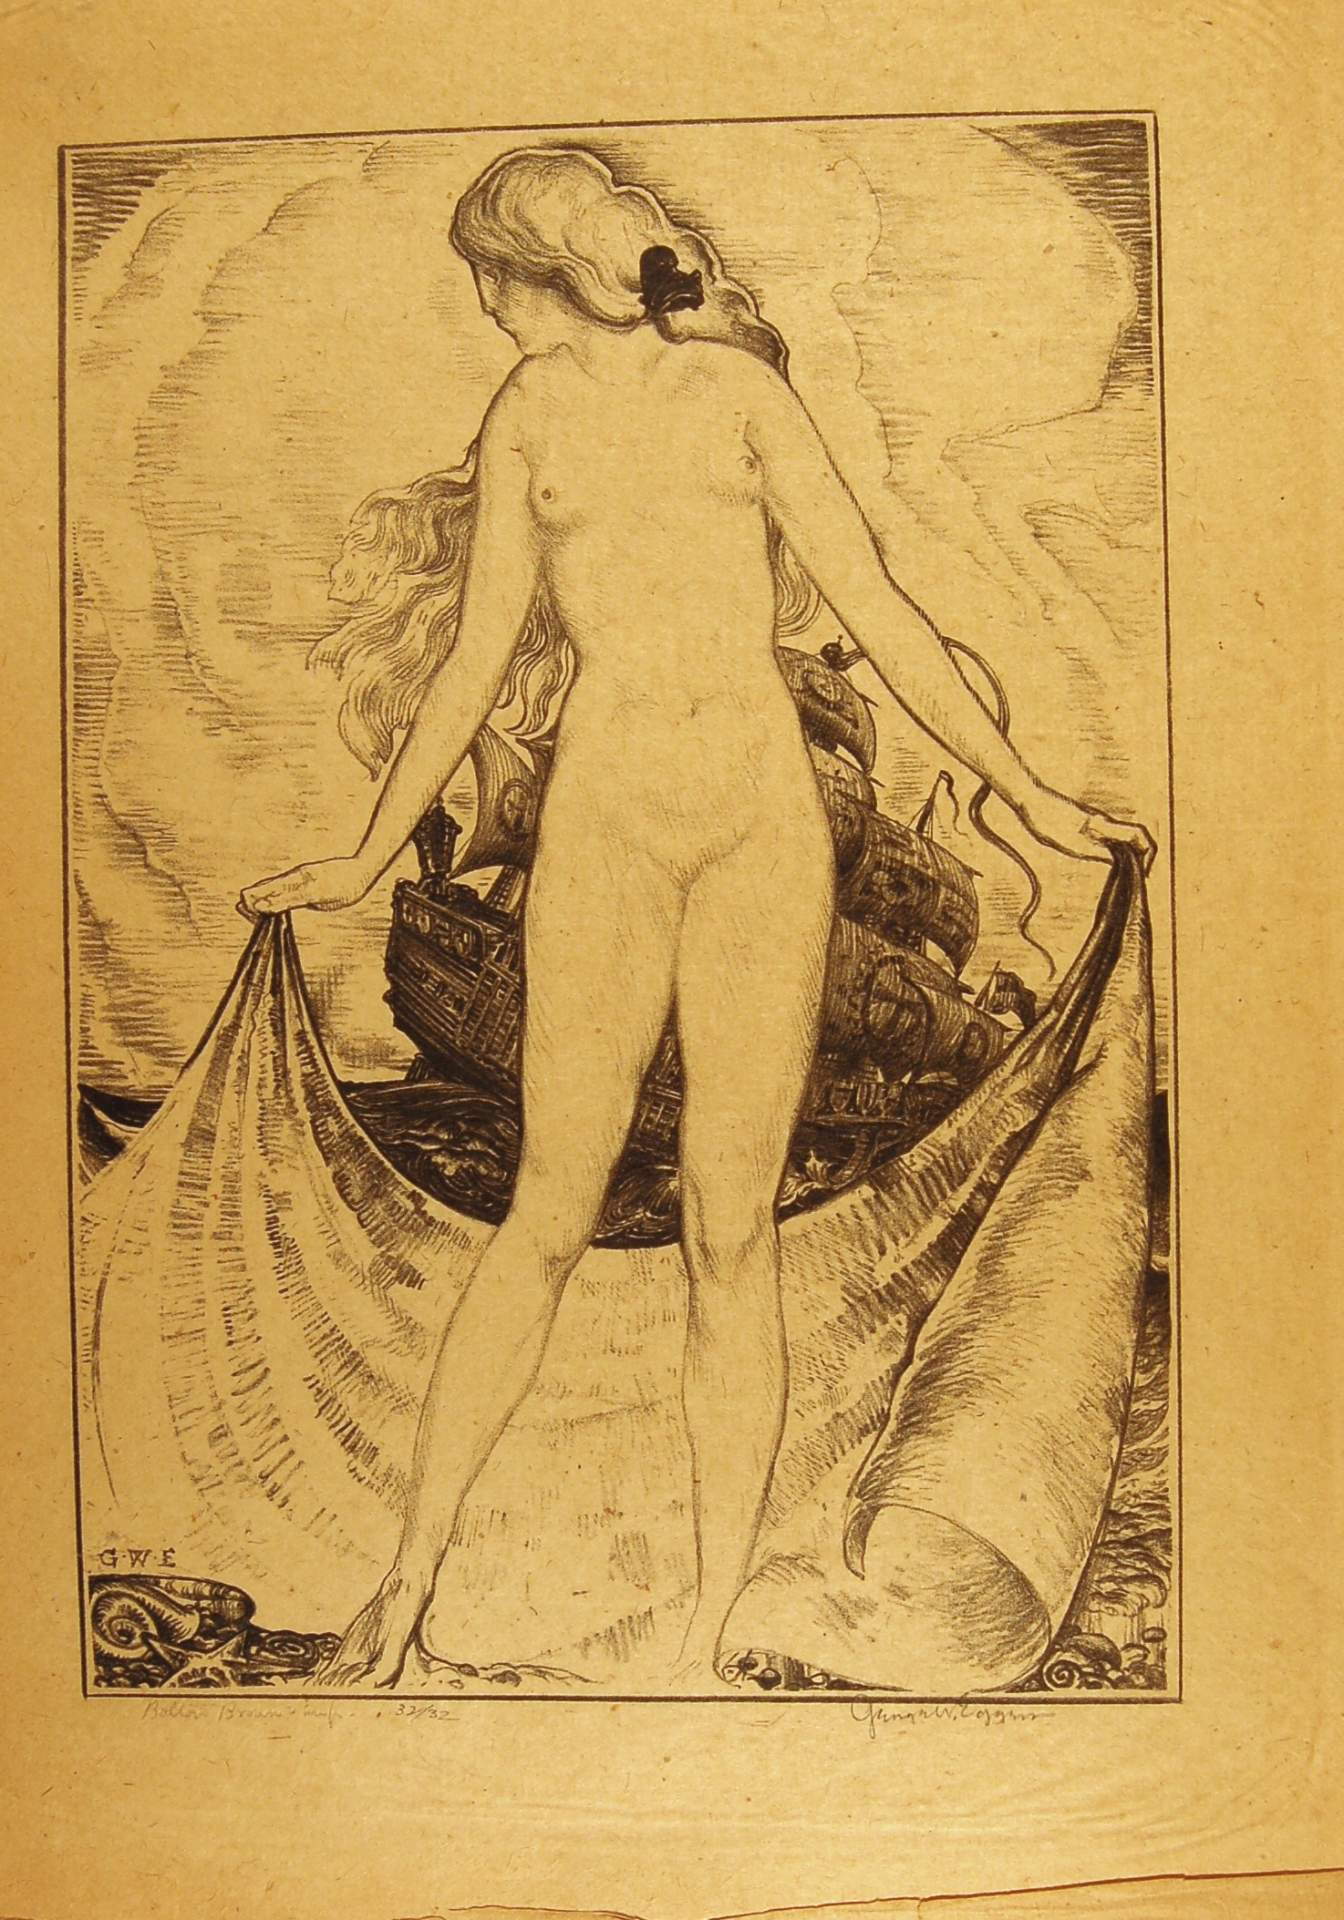 Female Nude with Sea and Ship Backgroud